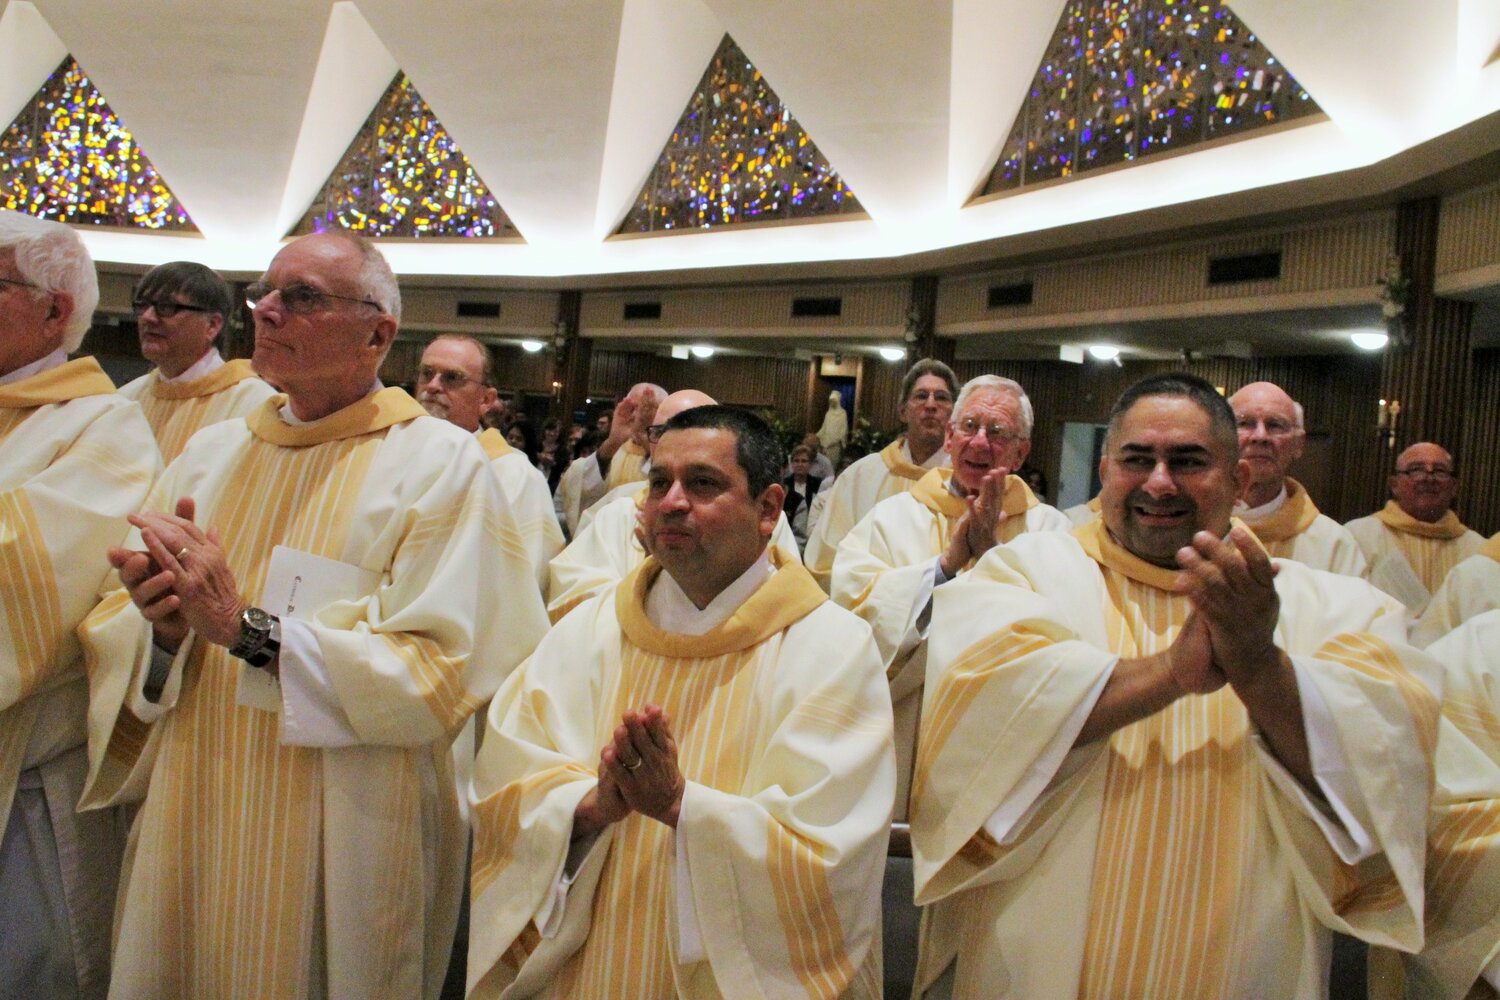 Permanent deacons of the Jefferson City diocese rejoice at the ordination of a group of fellow deacons in 2019.